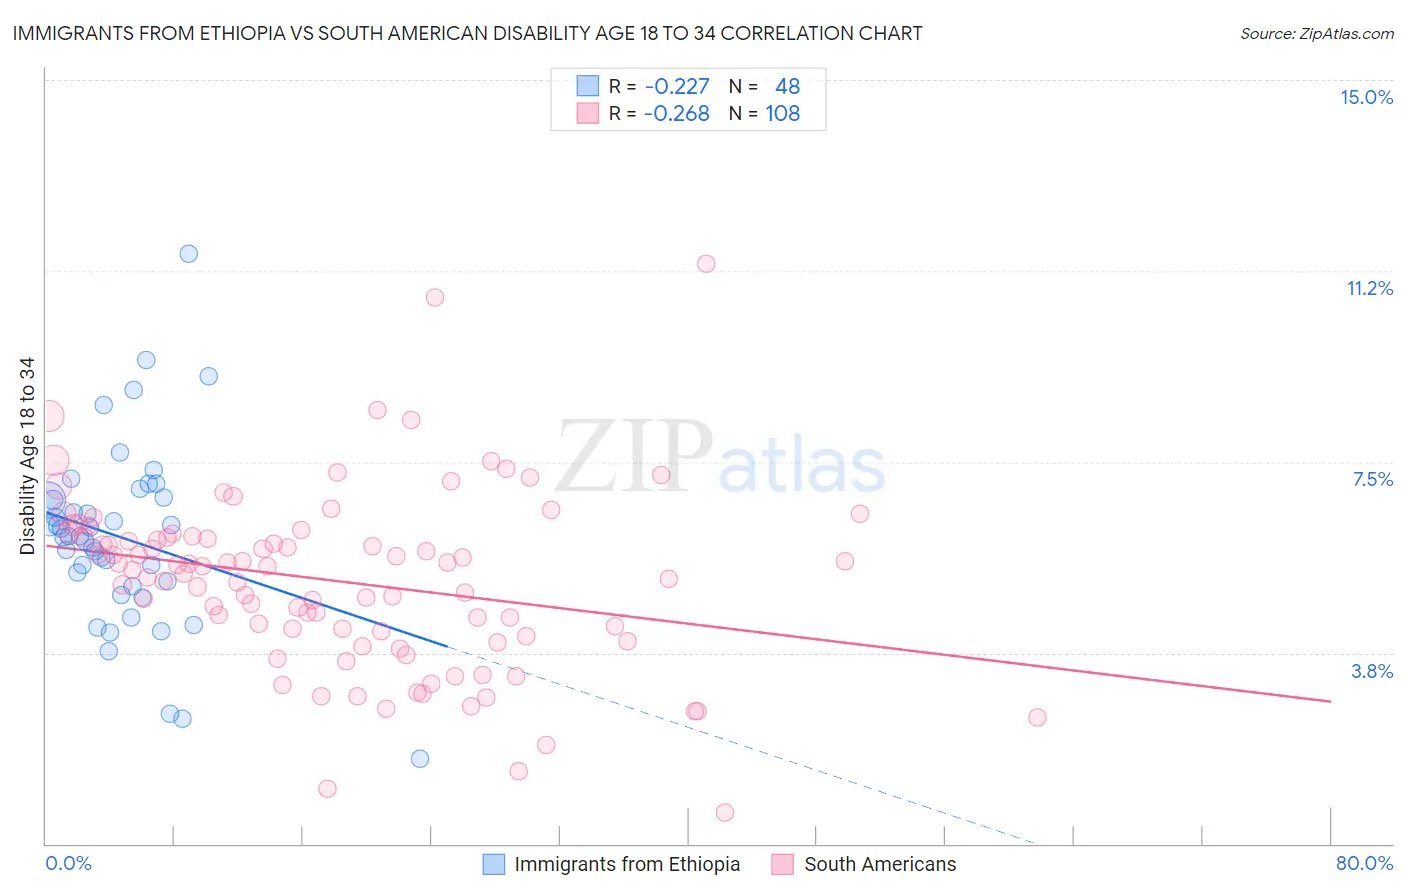 Immigrants from Ethiopia vs South American Disability Age 18 to 34